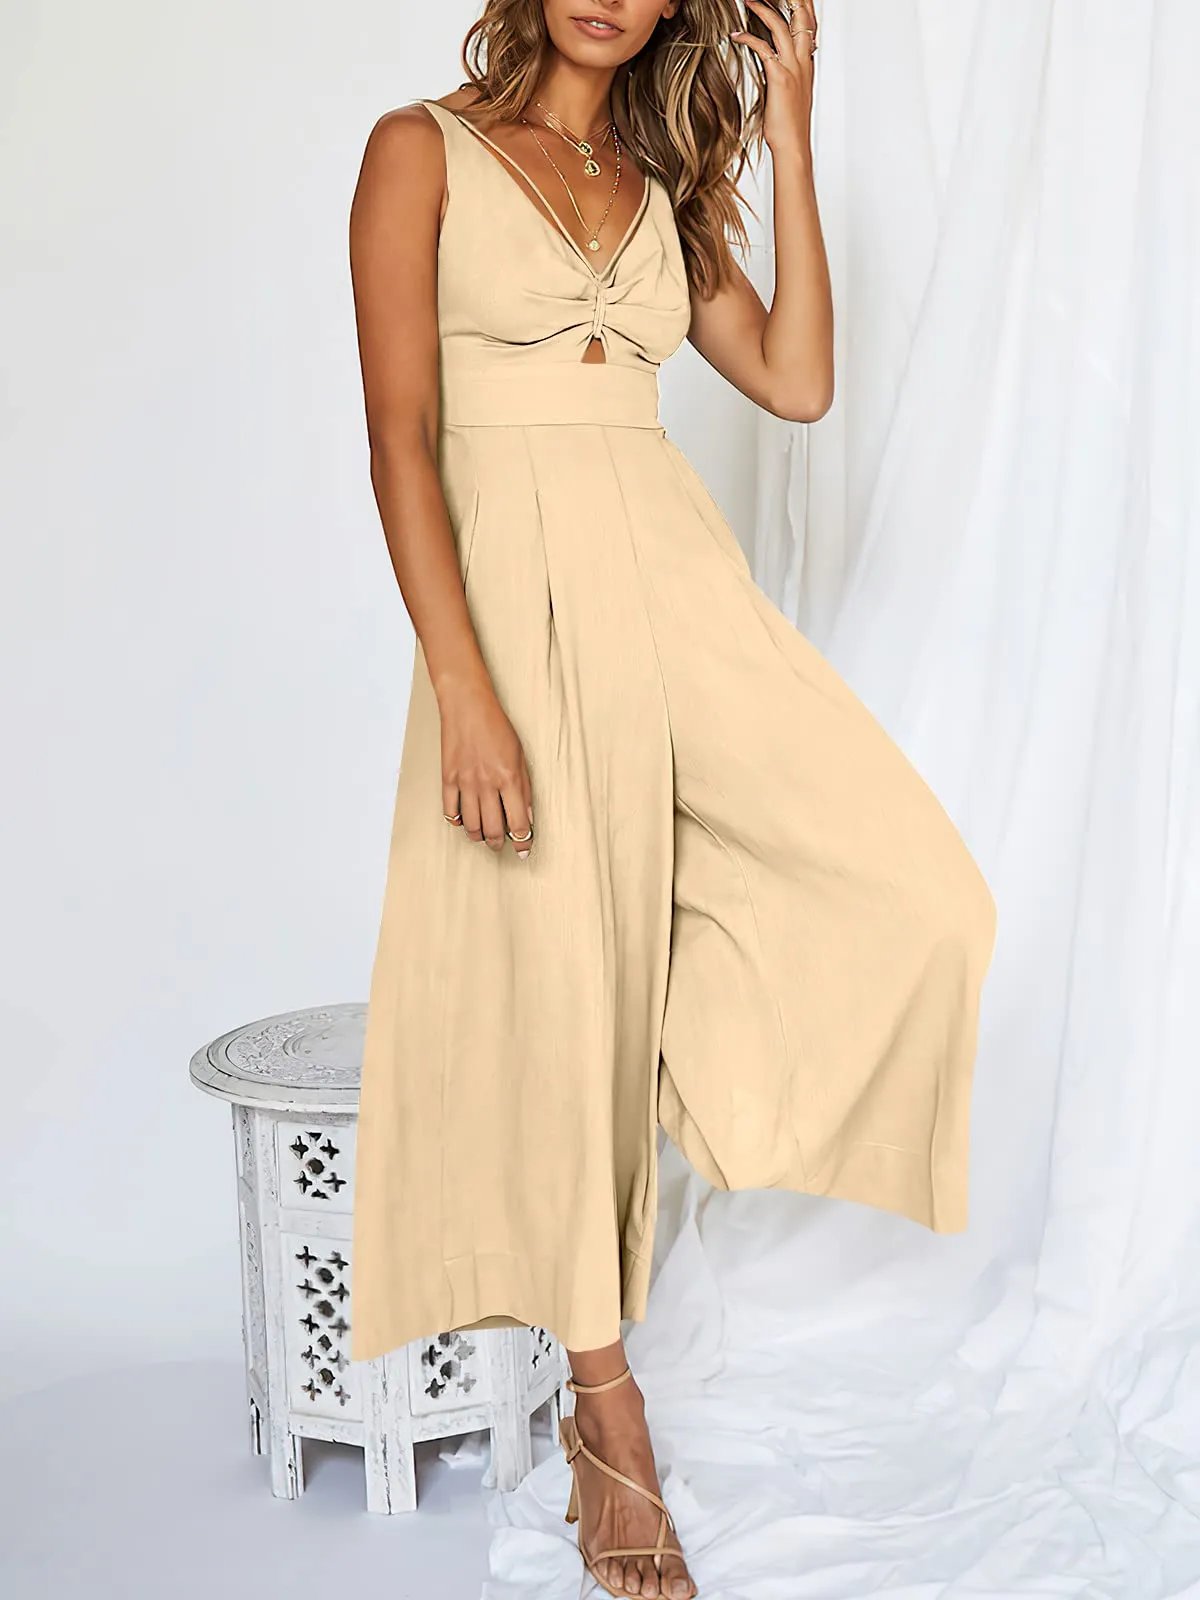 V Neck Cutout High-Waist Jumpsuits(Buy 2 free shipping)